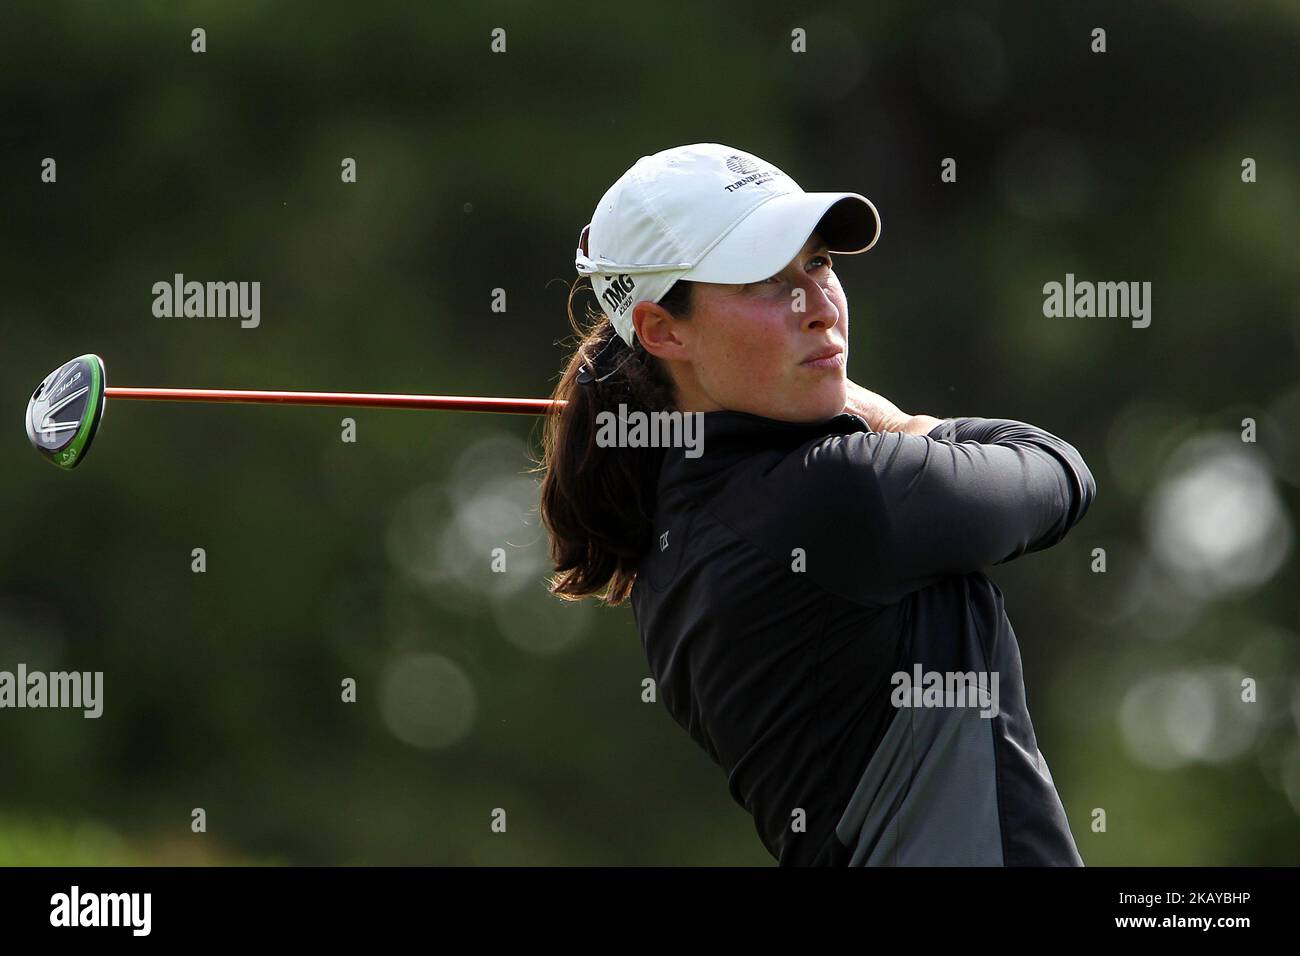 Laetitia Beck of Israel hits from the 10th tee during the first round of the Meijer LPGA Classic golf tournament at Blythefield Country Club in Belmont, MI, USA Thursday, June 14, 2018. (Photo by Amy Lemus/NurPhoto) Stock Photo